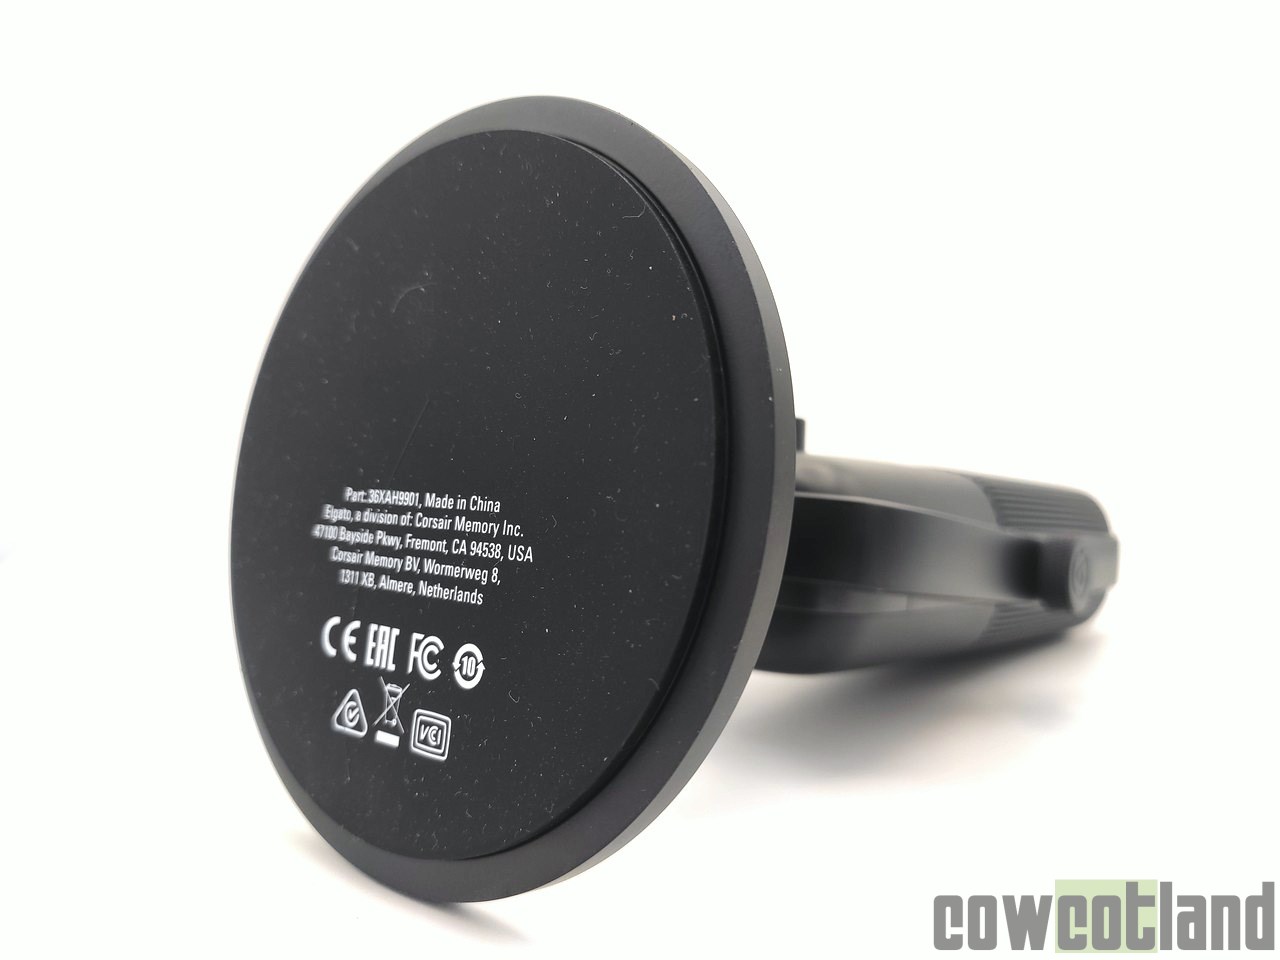 Image 44880, galerie Test Elgato Wave:3, un microphone cardiode USB taill pour le streaming